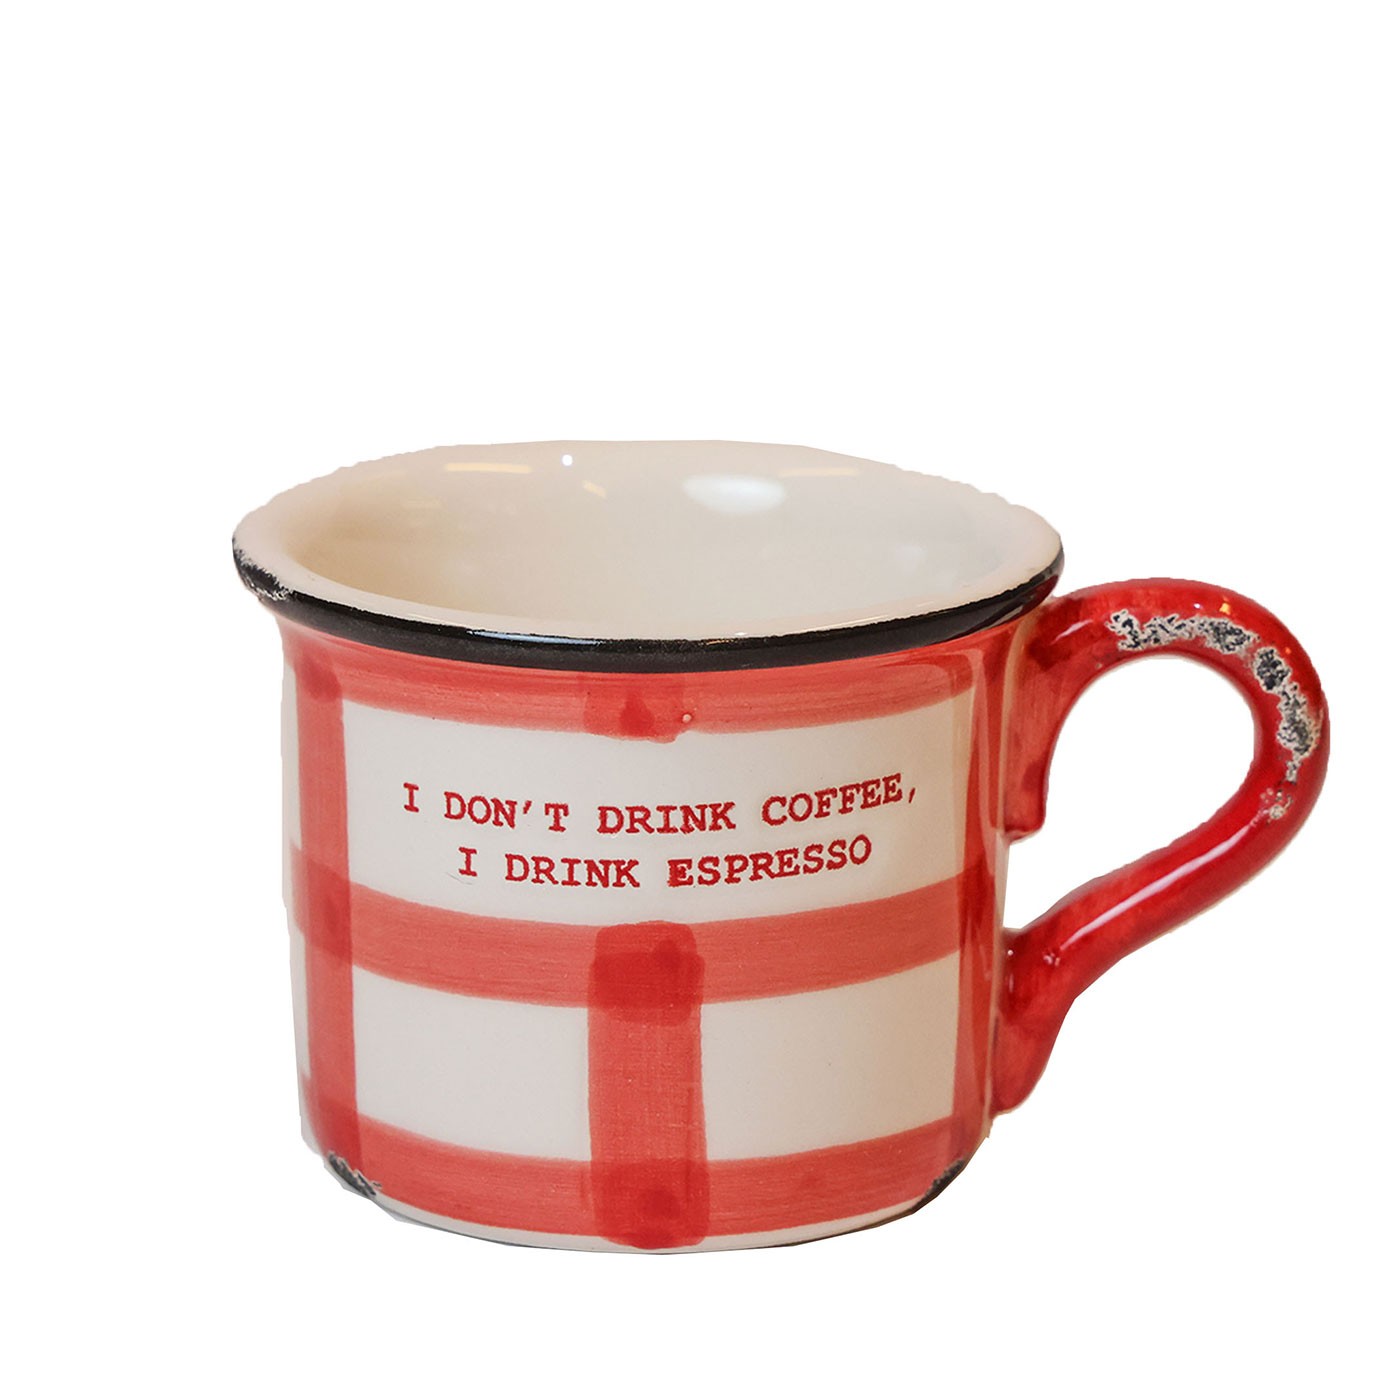 Eataly White and Red Checked Mug